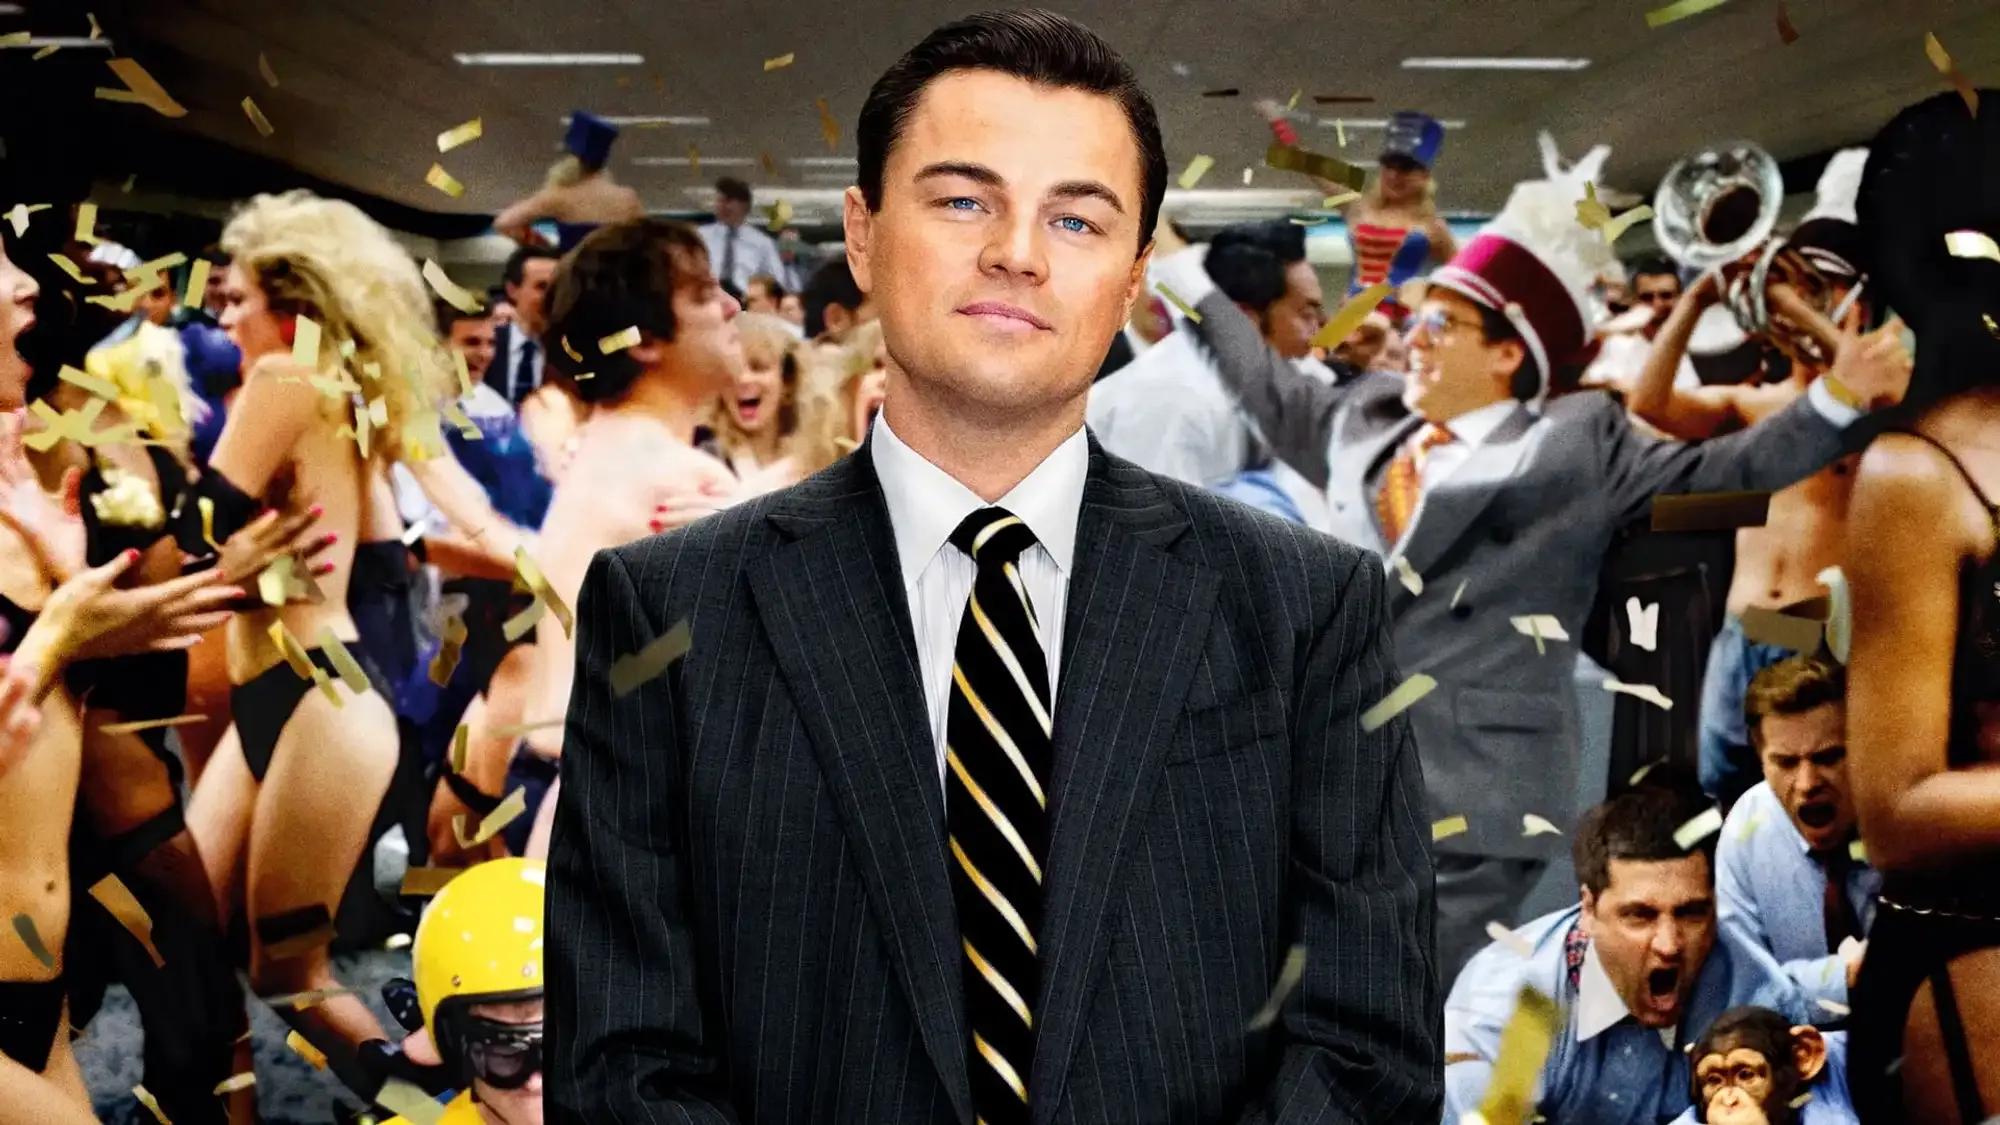 The Wolf of Wall Street movie review